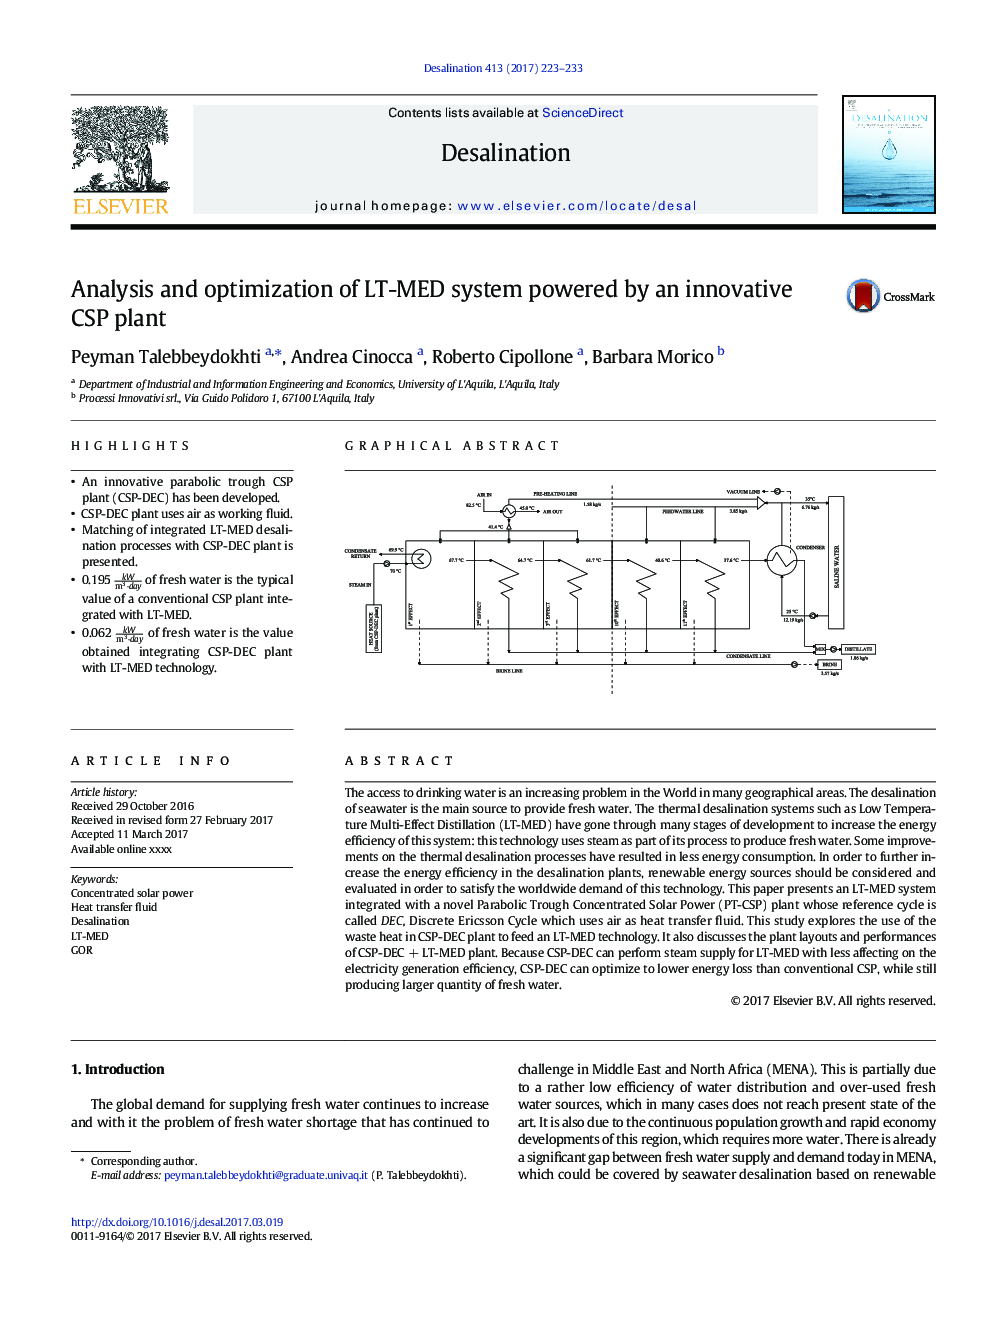 Analysis and optimization of LT-MED system powered by an innovative CSP plant